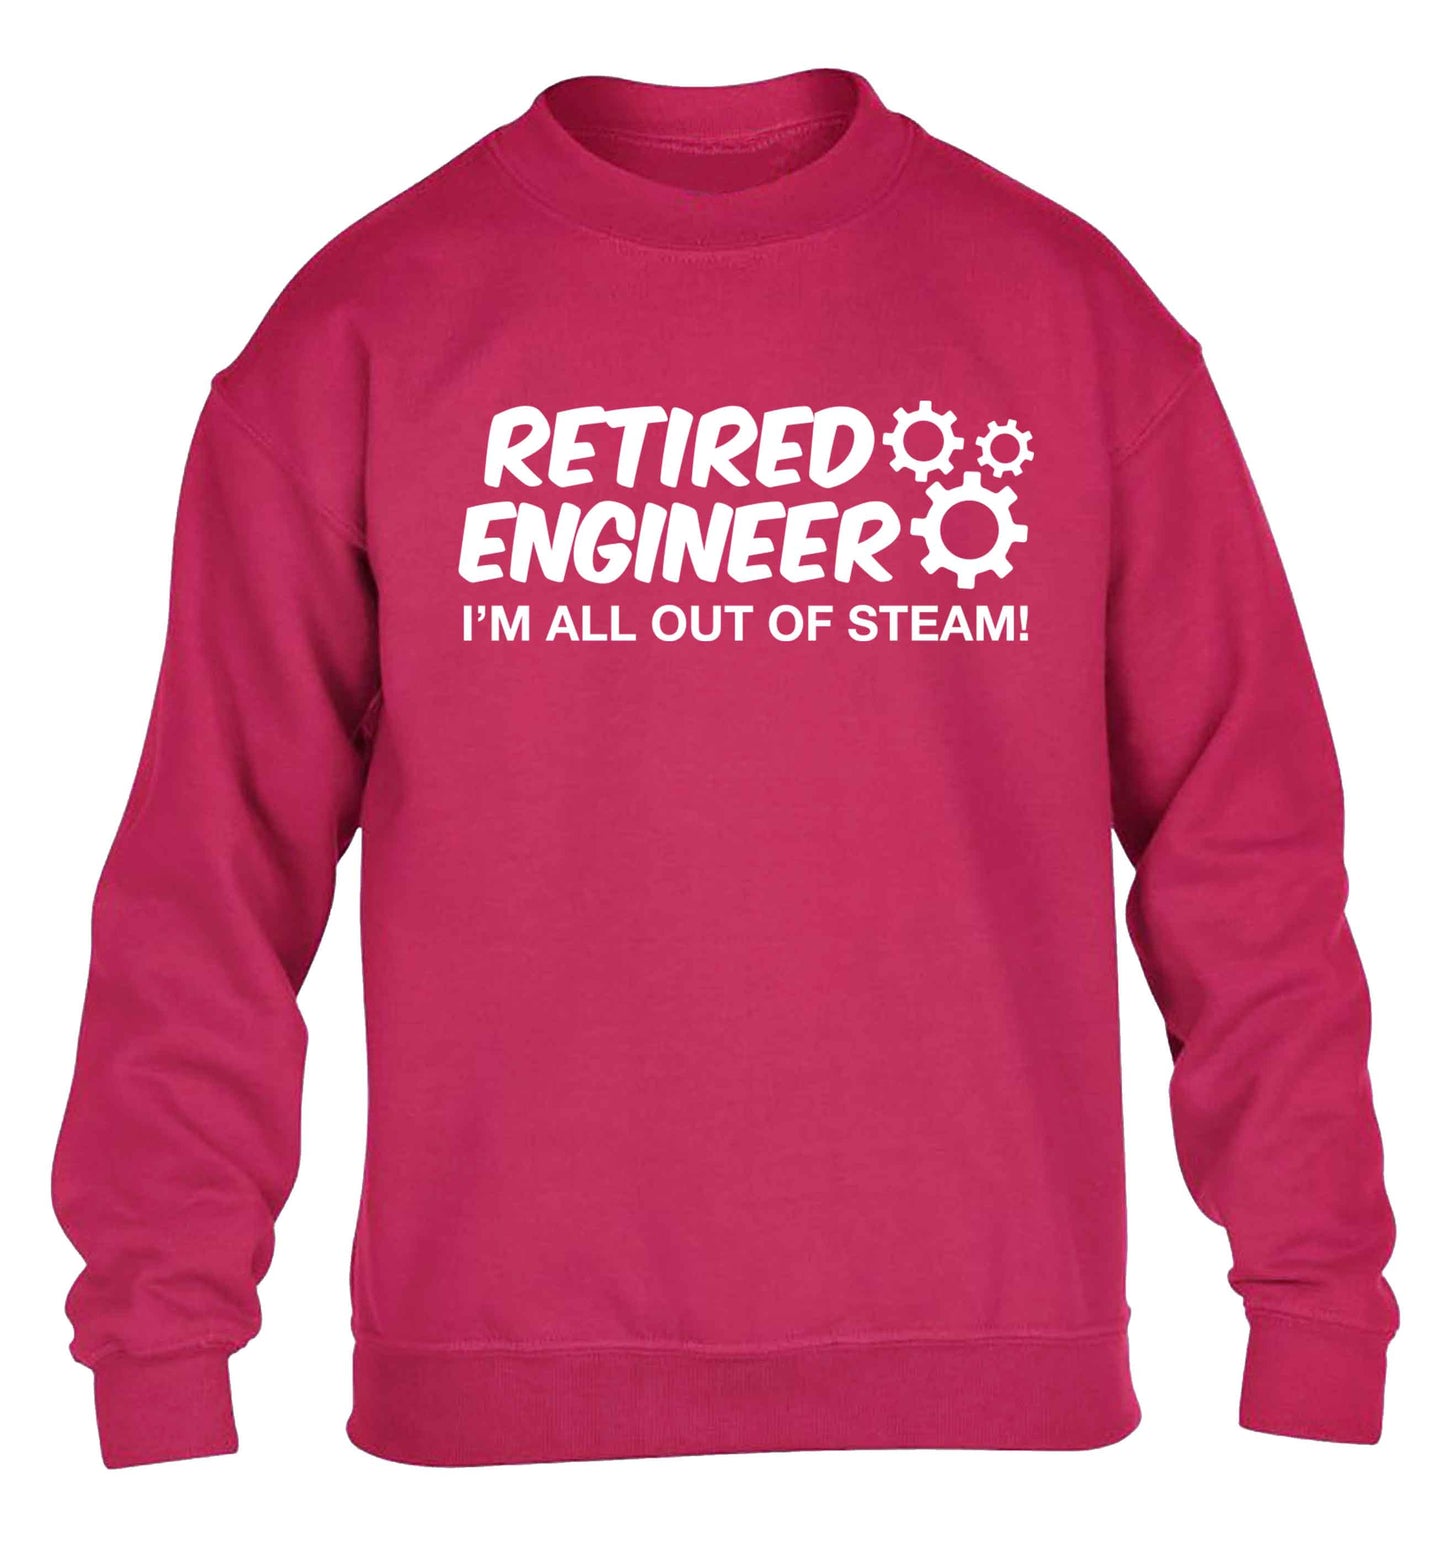 Retired engineer I'm all out of steam children's pink sweater 12-13 Years